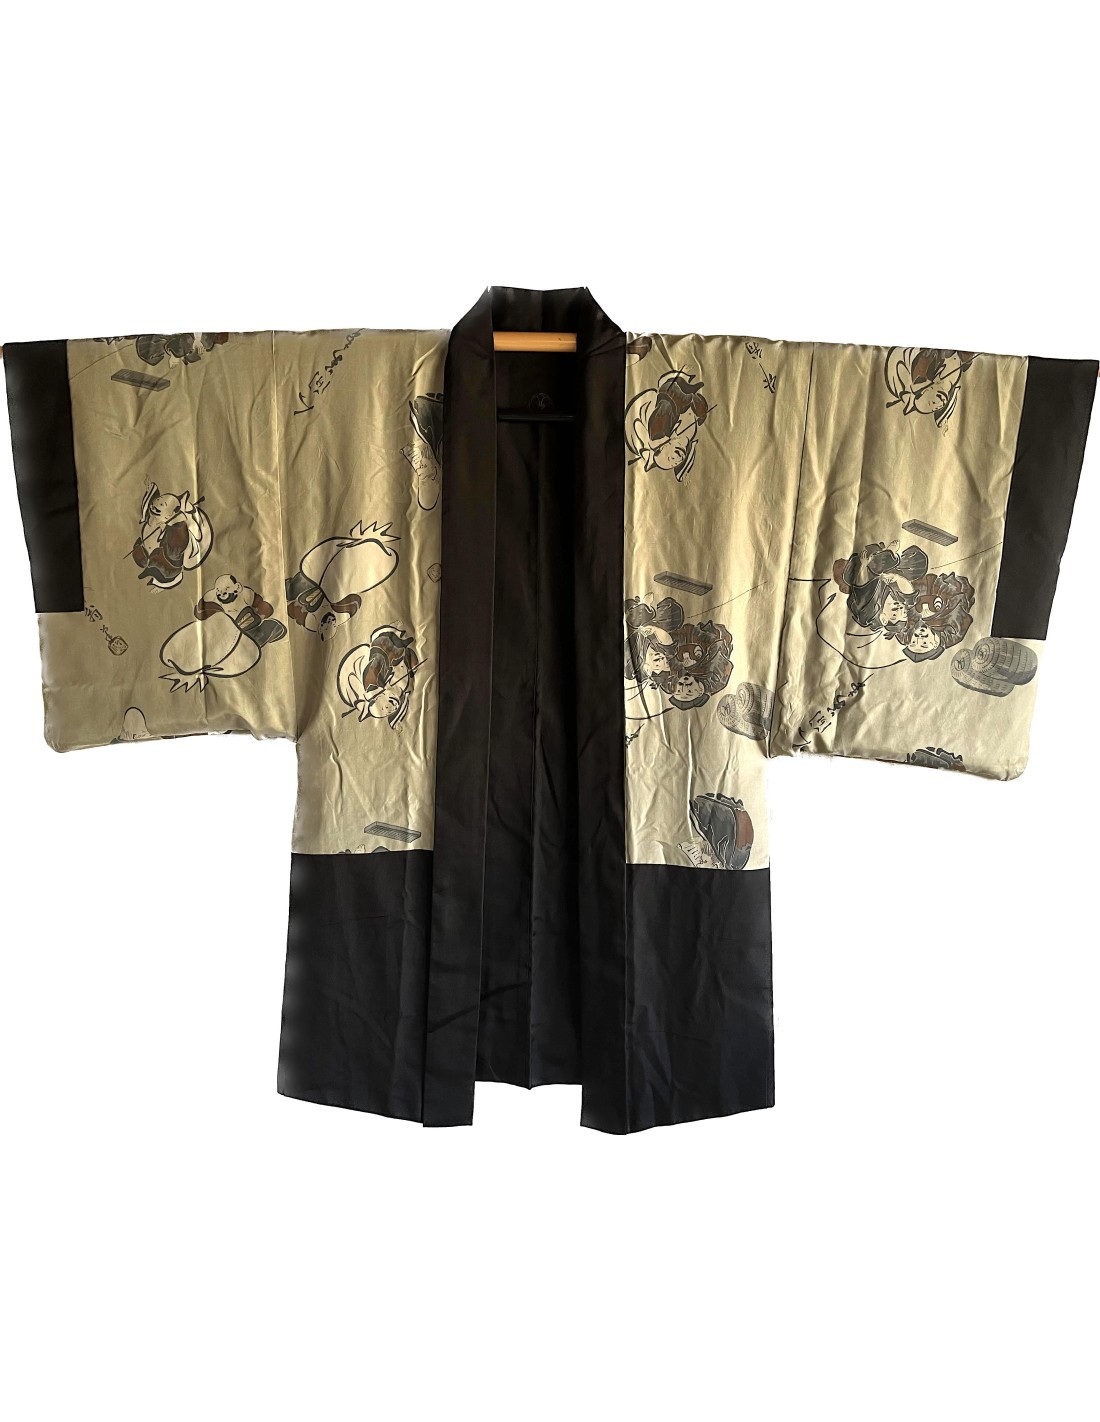 Patterned yukata a chic style for men